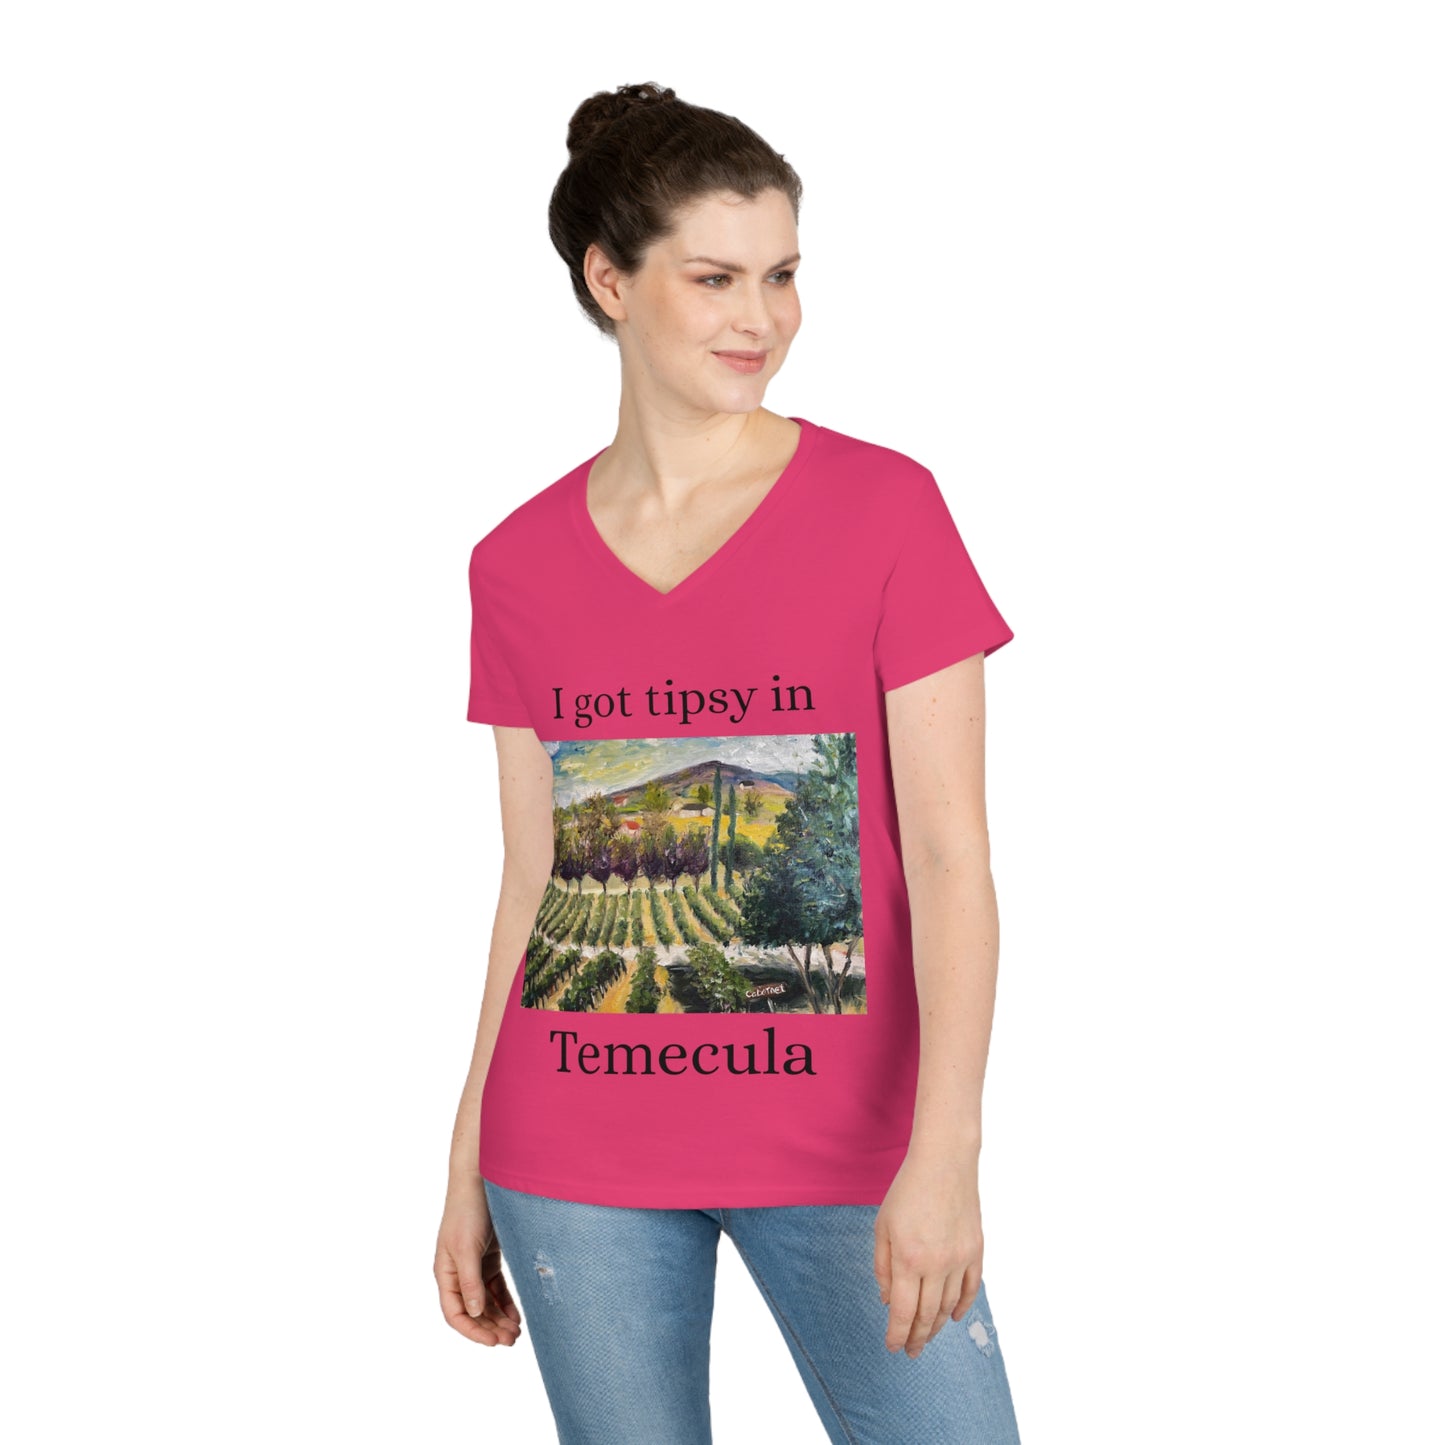 Cabernet Lot at Oak Mountain Winery- "I got Tipsy in Temecula"-- Ladies' V-Neck T-Shirt